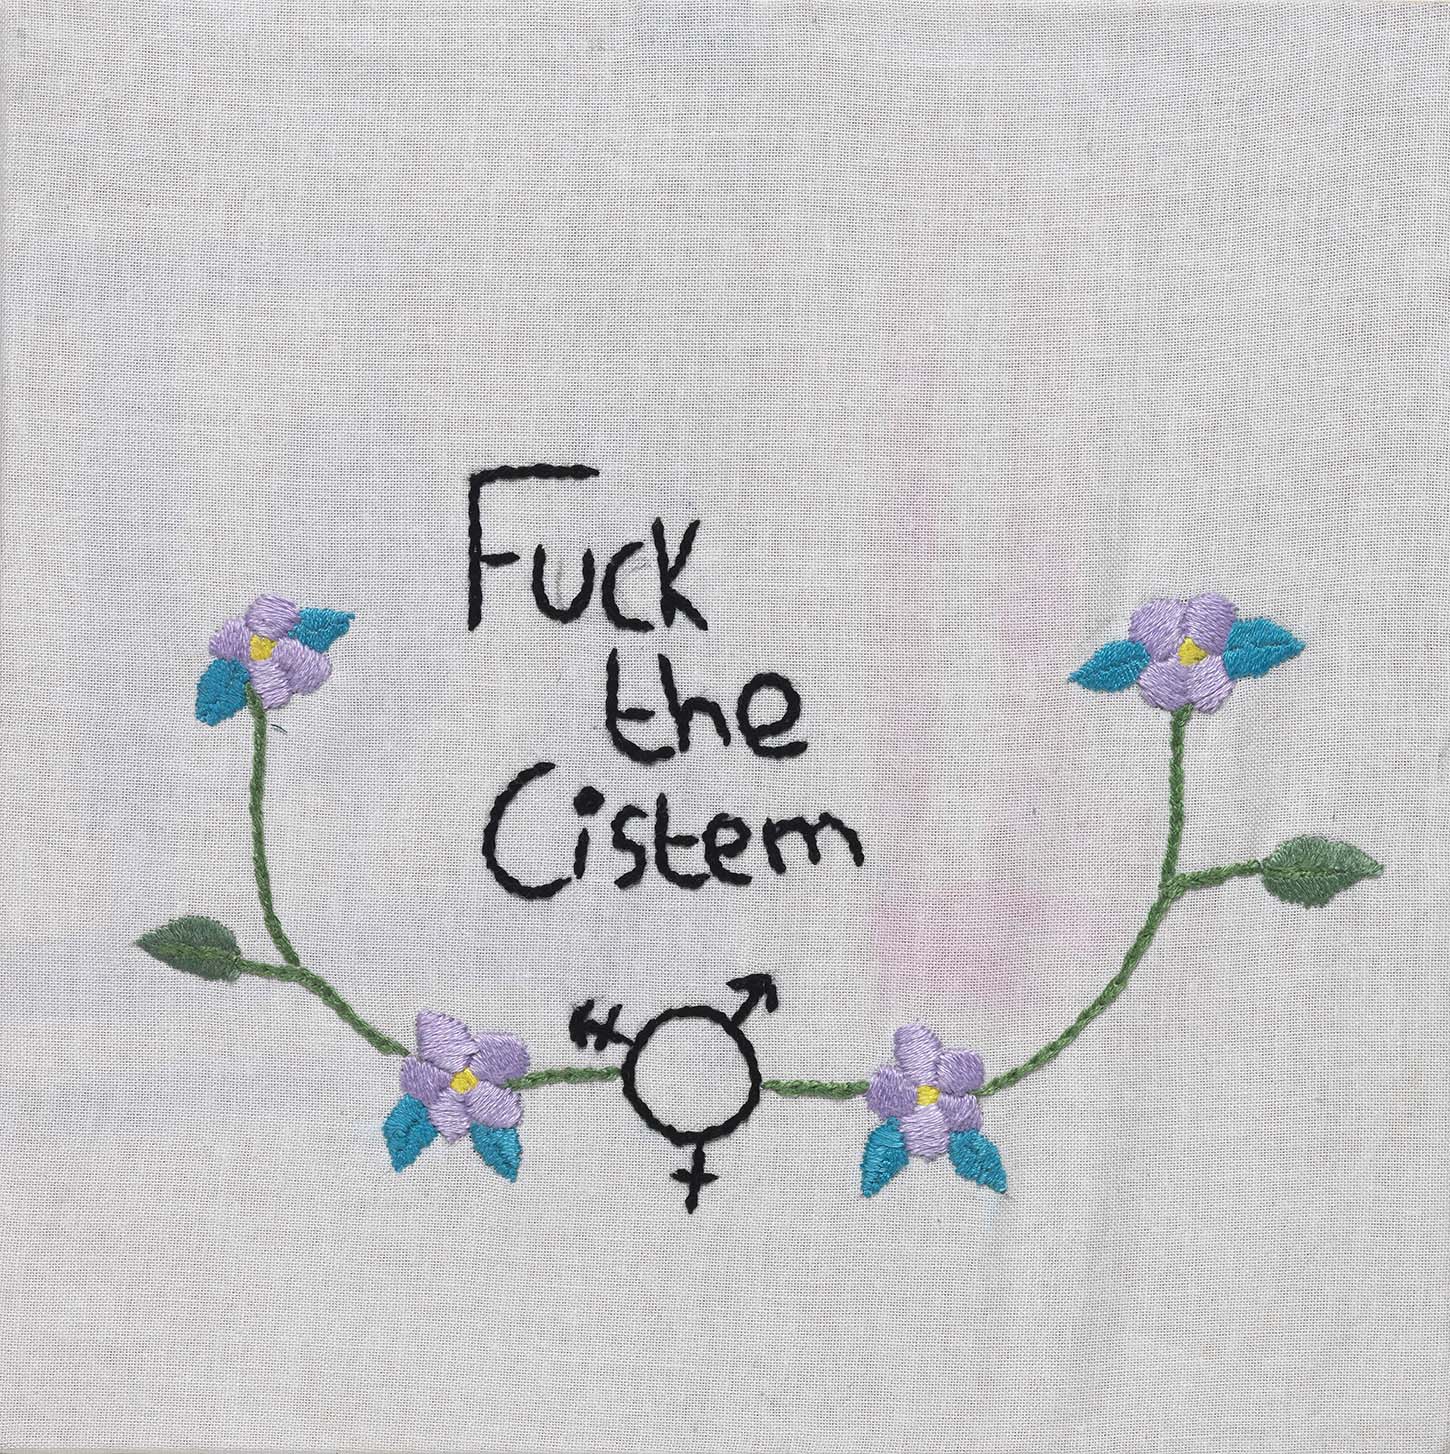 Embroidered floral design interlaced with transgender symbol and text reading F*ck the Cistem